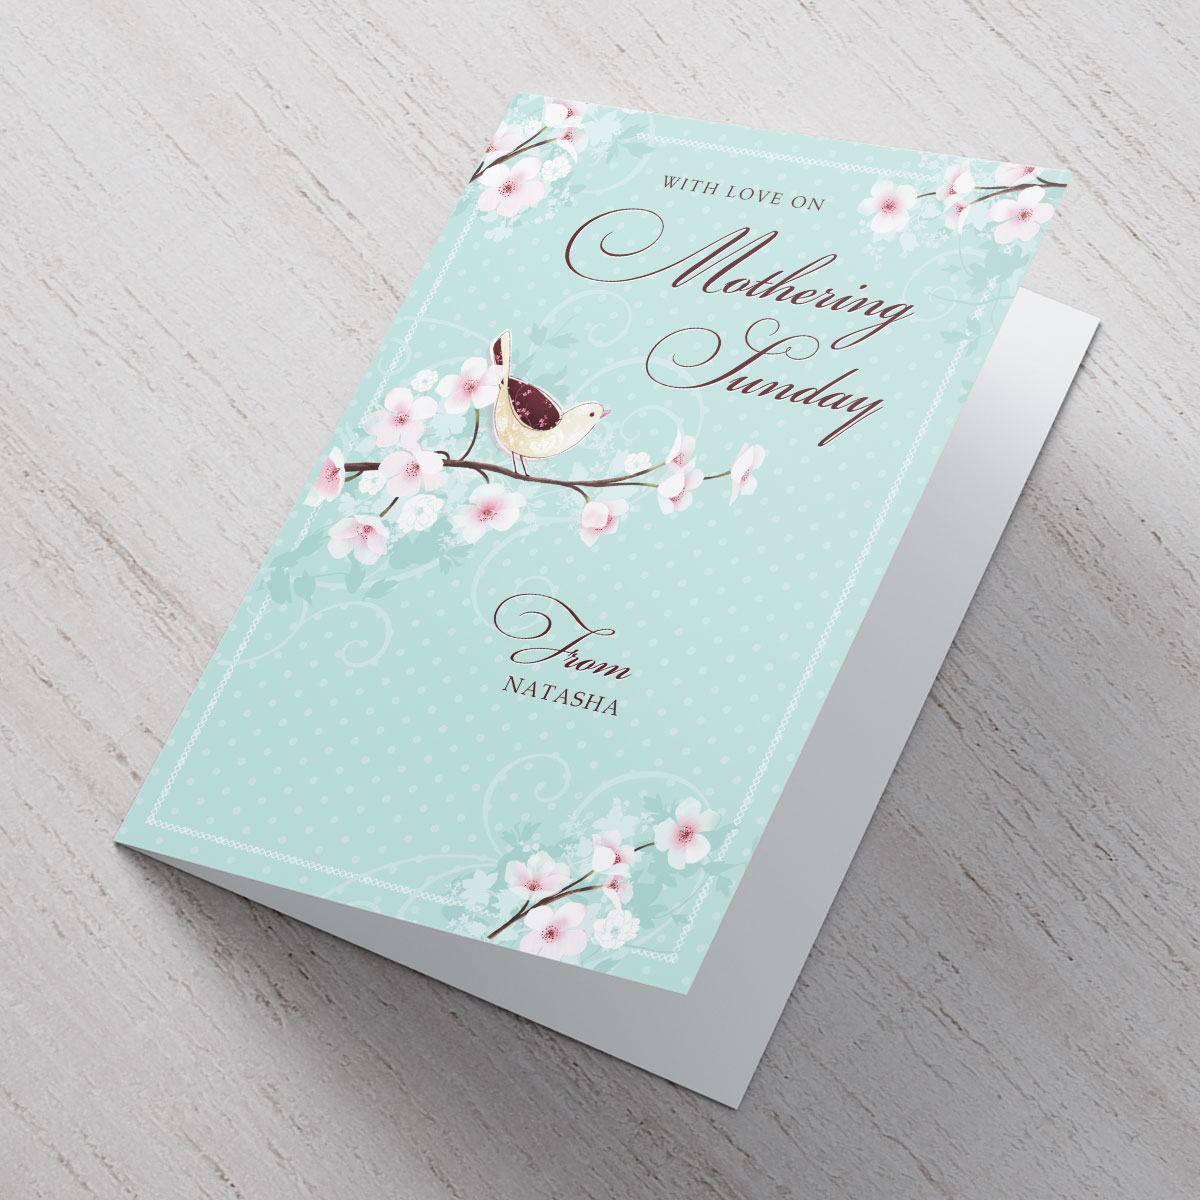 Personalised Mother's Day Card - With Love On Mothering Sunday